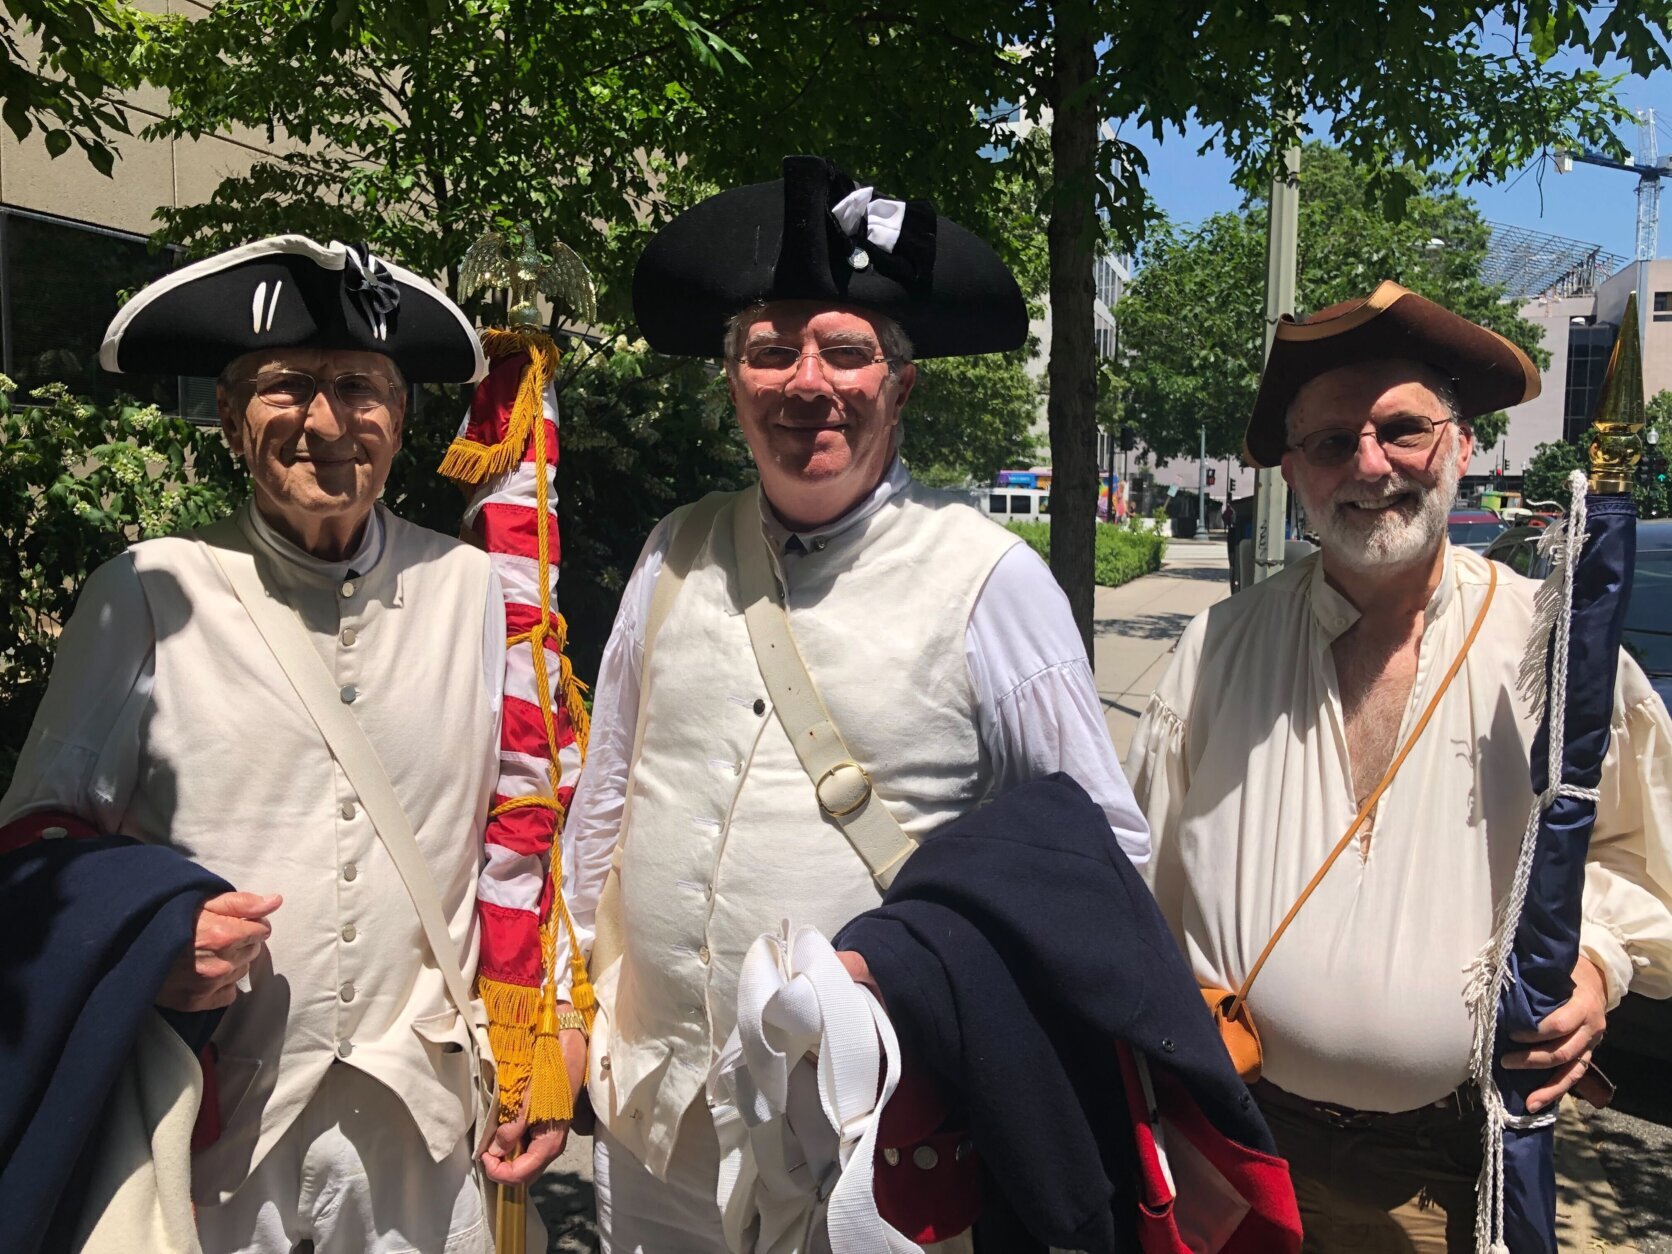 Re-enactors from the Sons of the American Revolution braved the temperatures in authentic garb to march in Monday's parade.